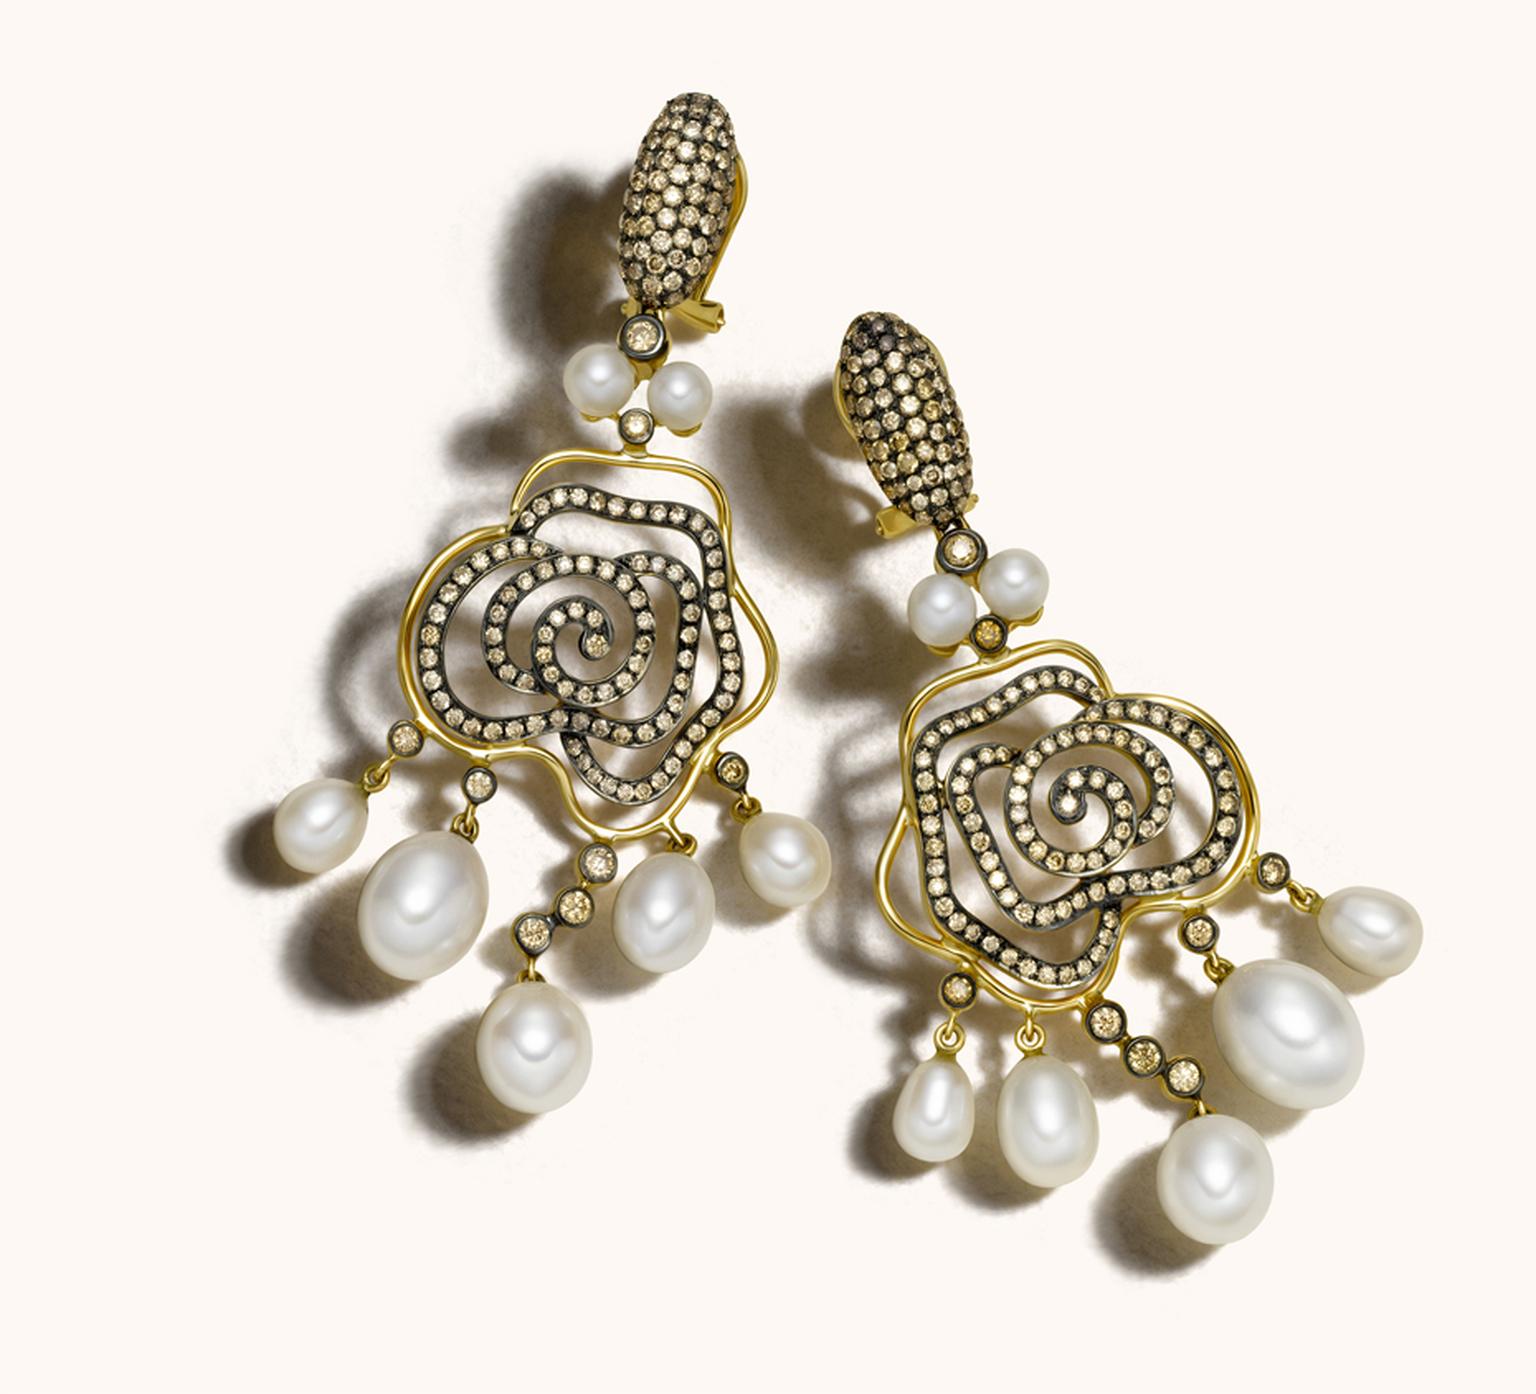 Zoya Espan~a collection gold, diamond and pearl earrings